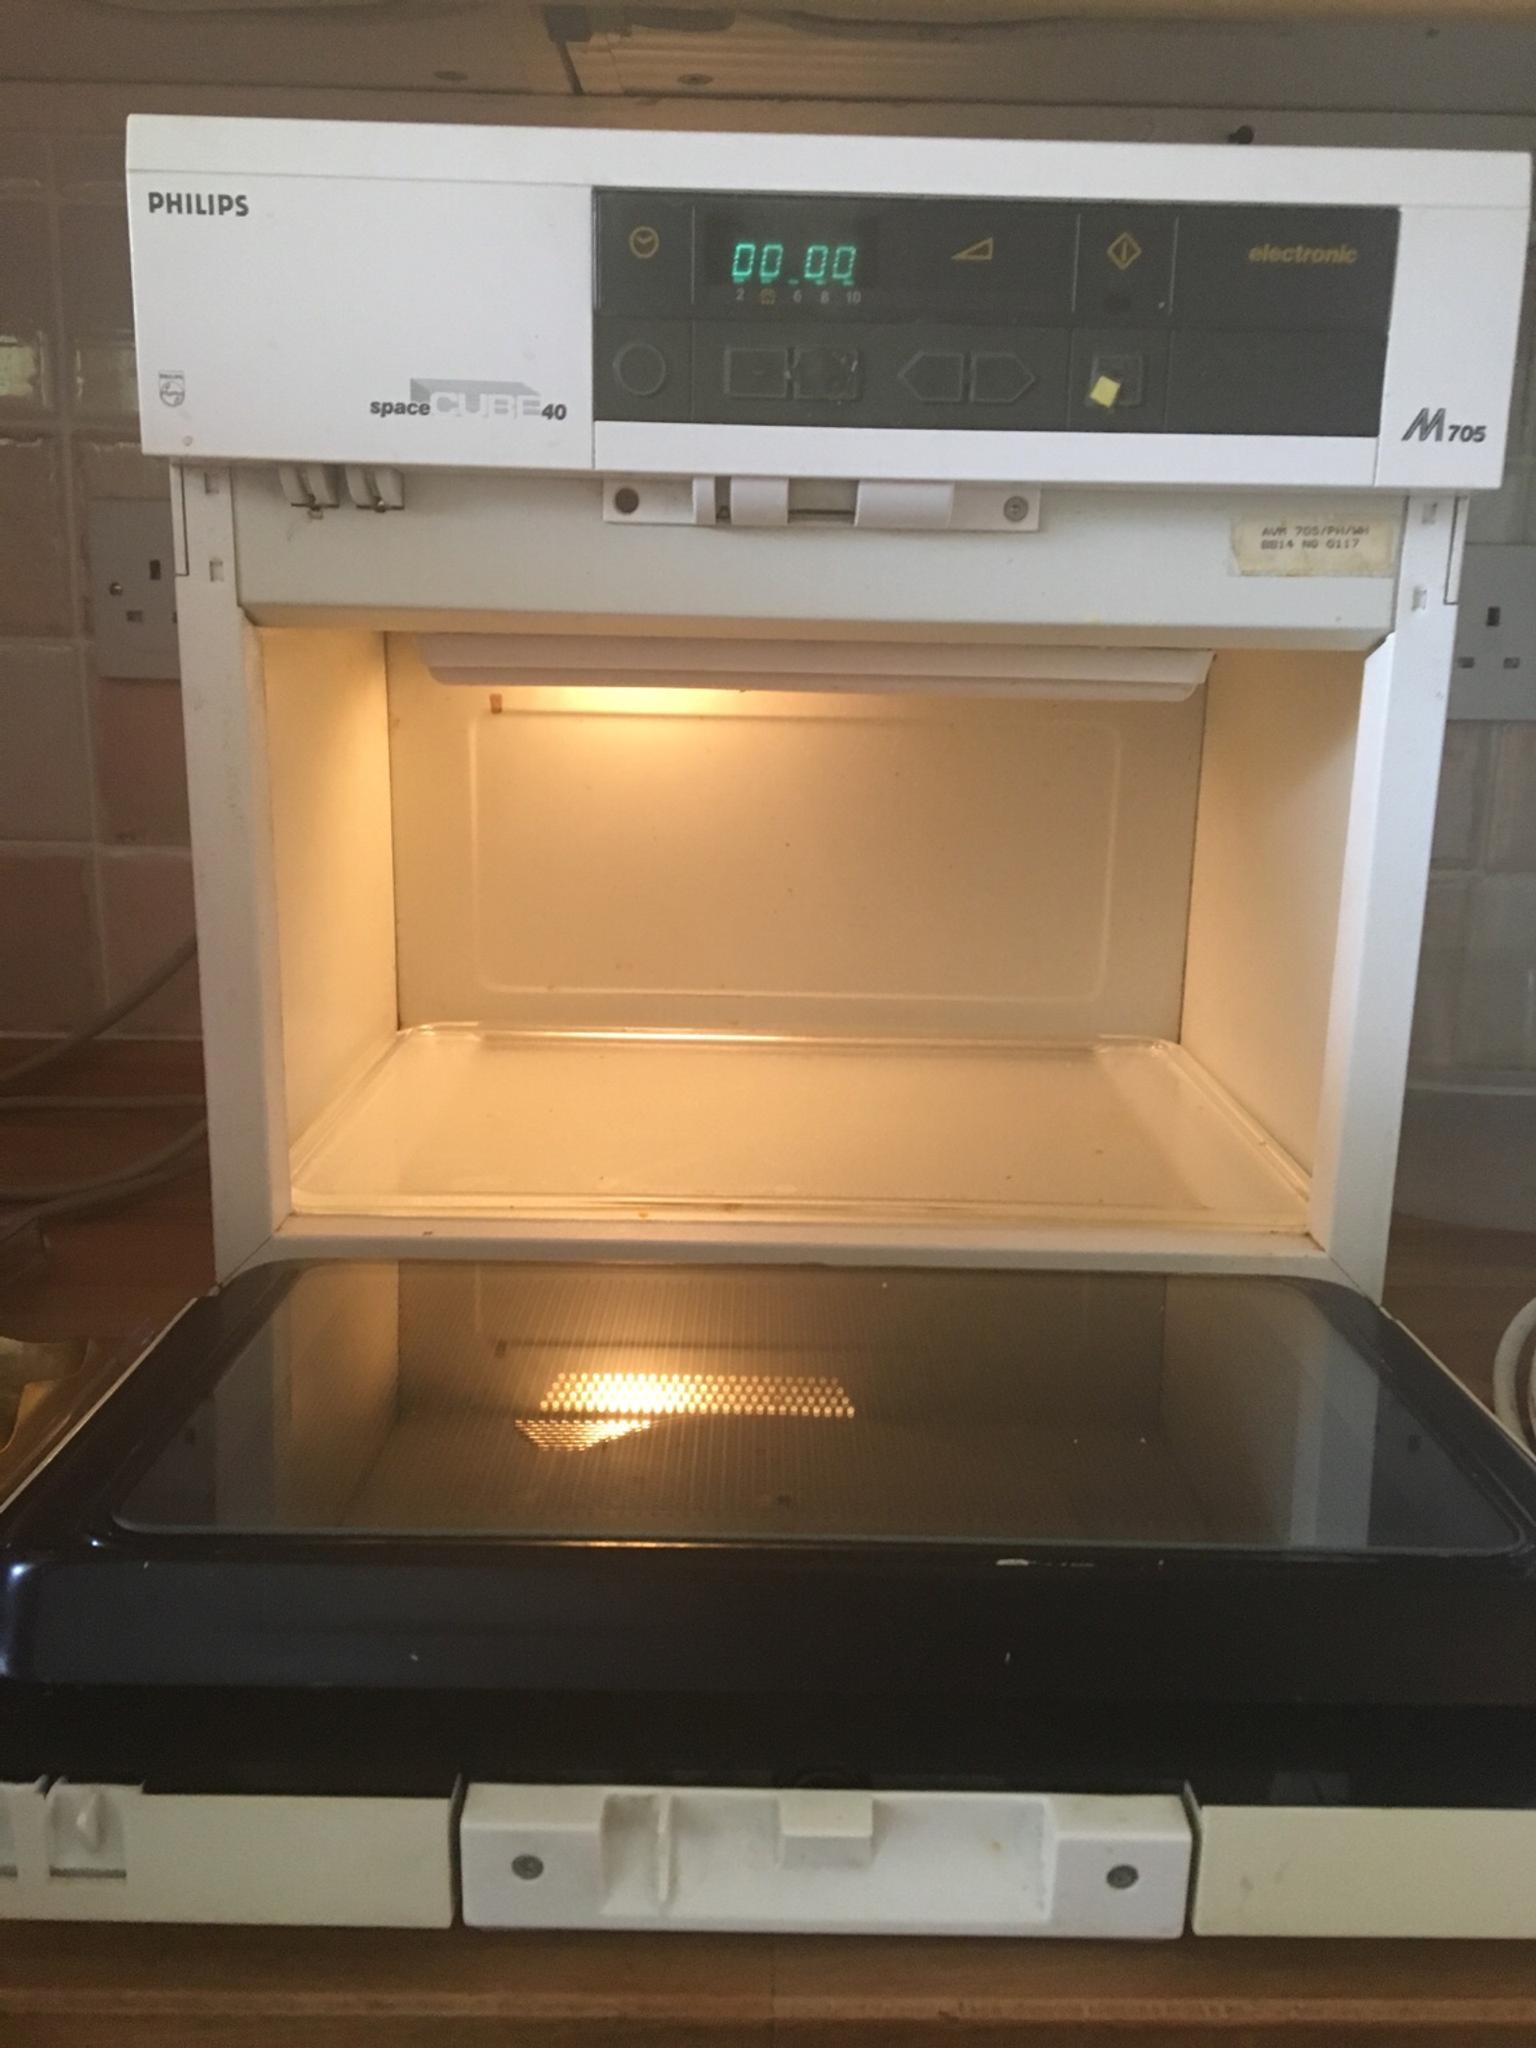 Philips microwave oven in London Borough of Hillingdon for £10.00 for